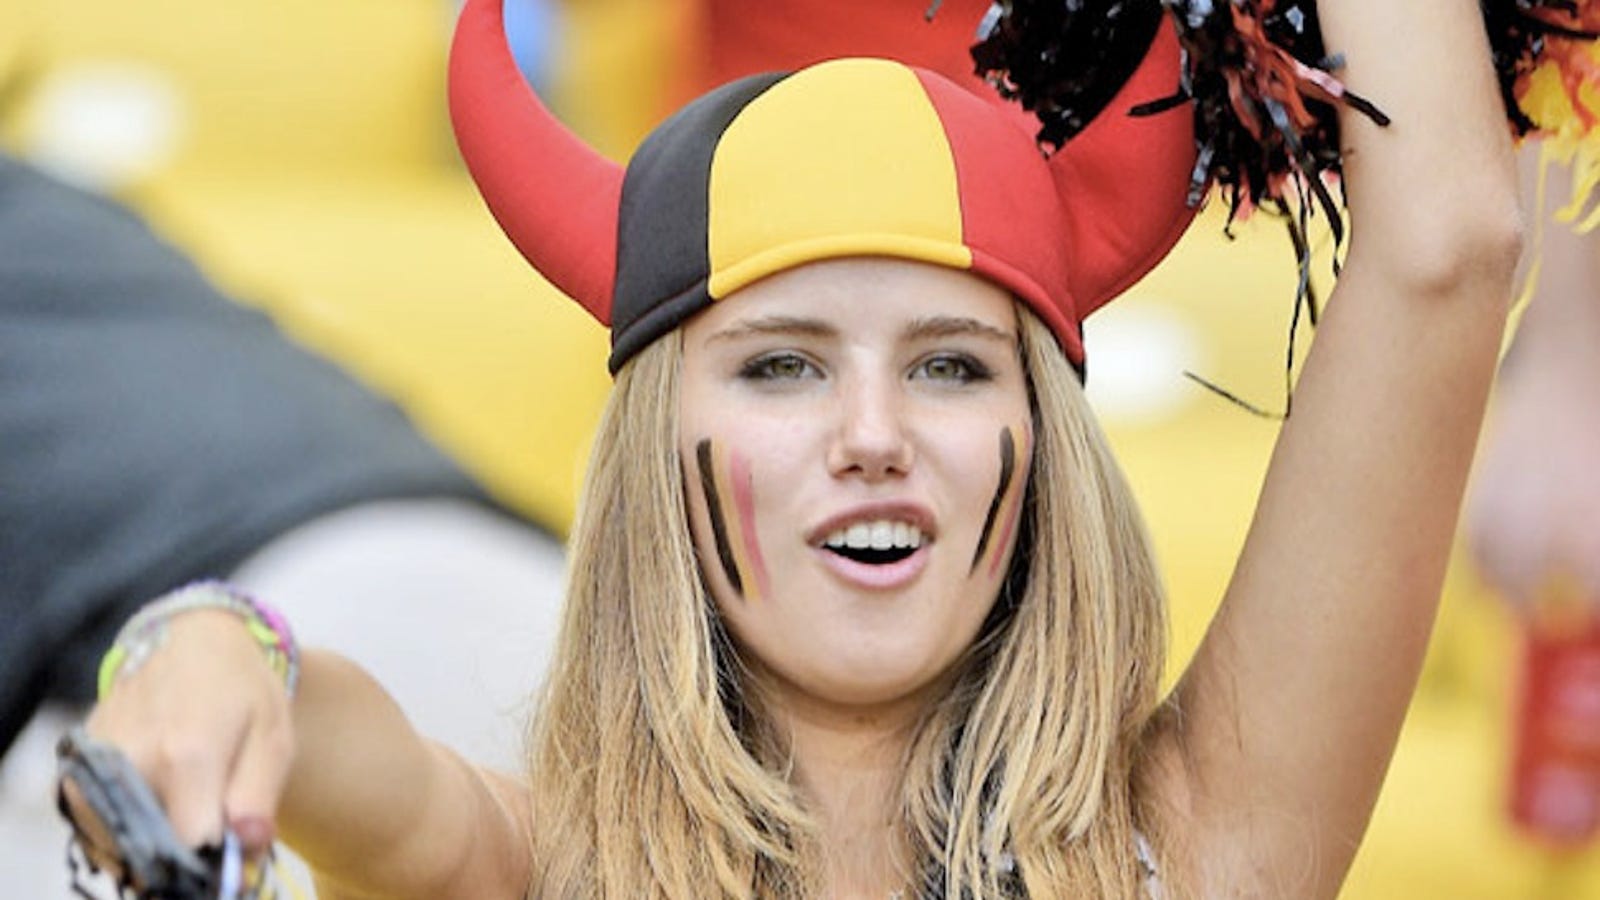 Hot Belgian World Cup Fan Has Already Lost Her Loreal Contract